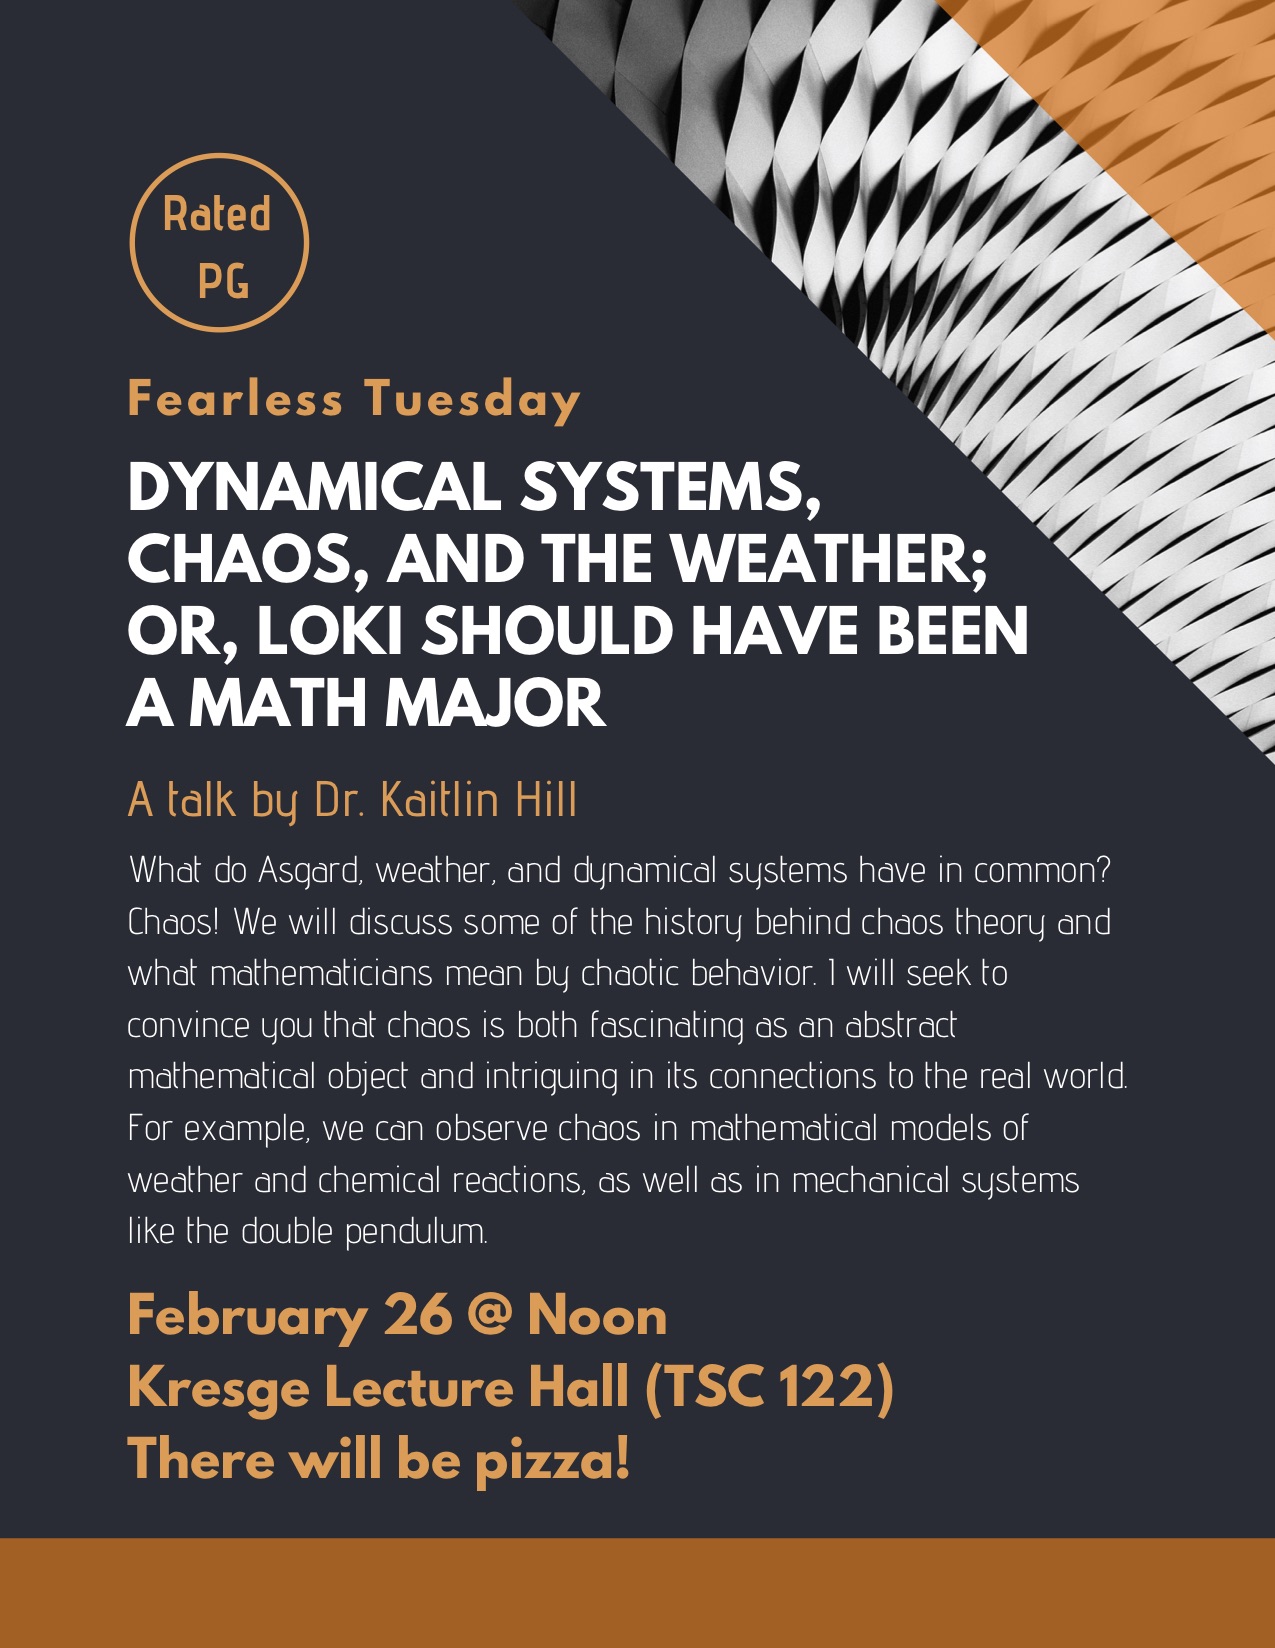 Feb 26 - Dynamical systems chaos